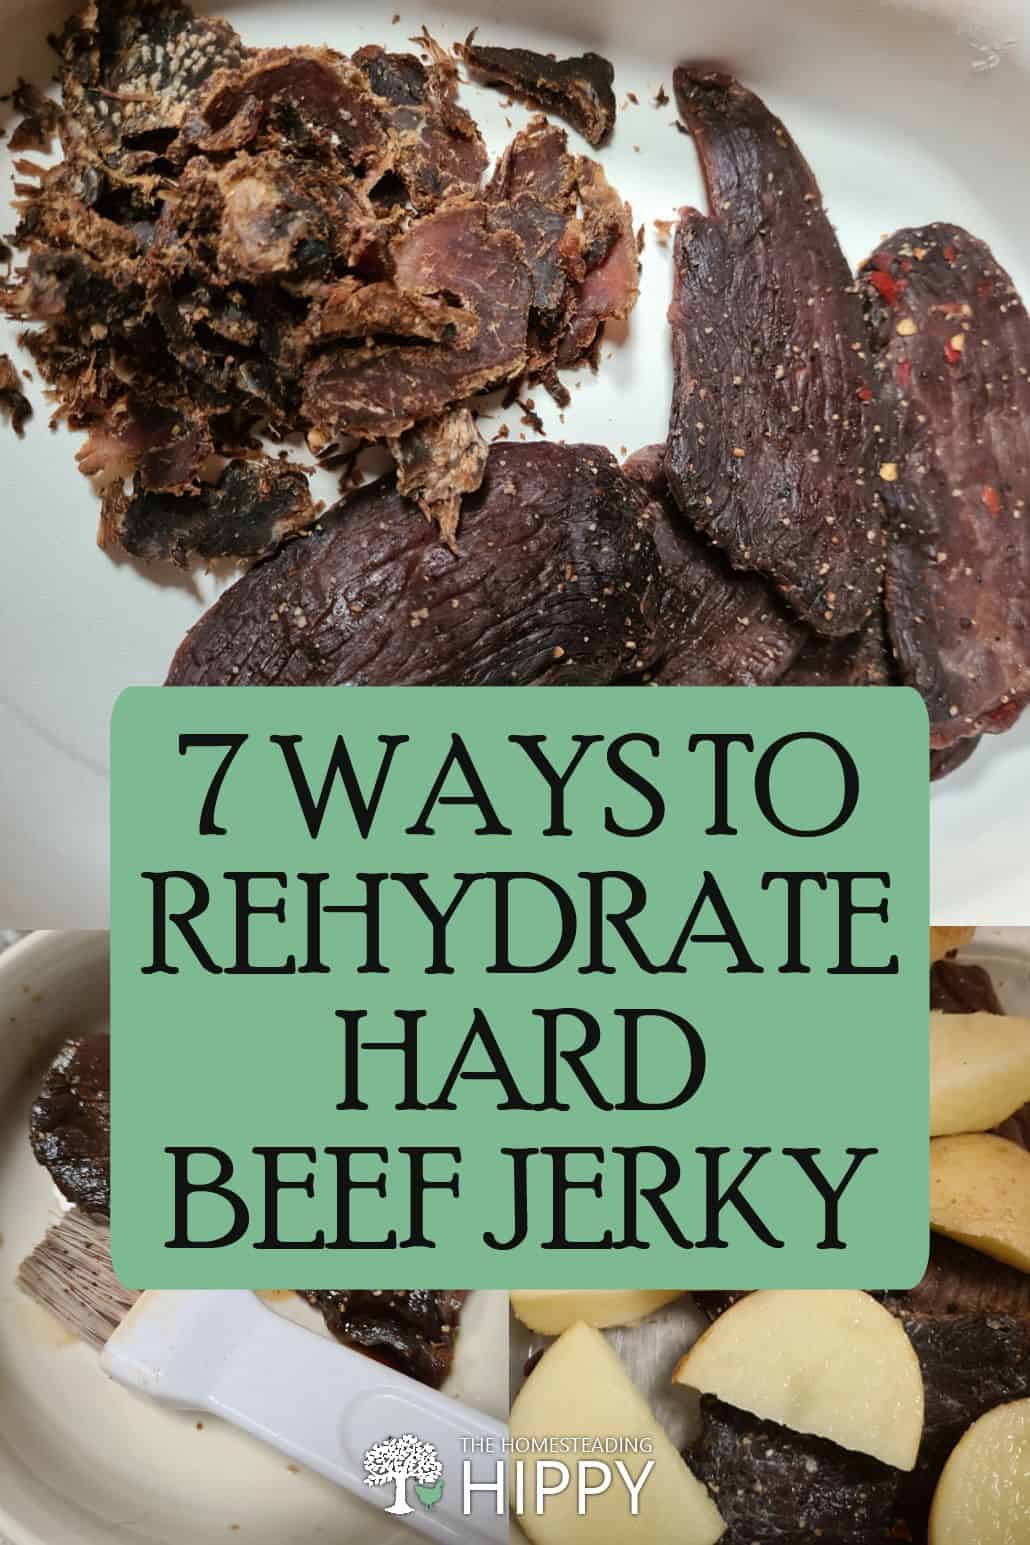 How to Rehydrate Beef Jerky? 